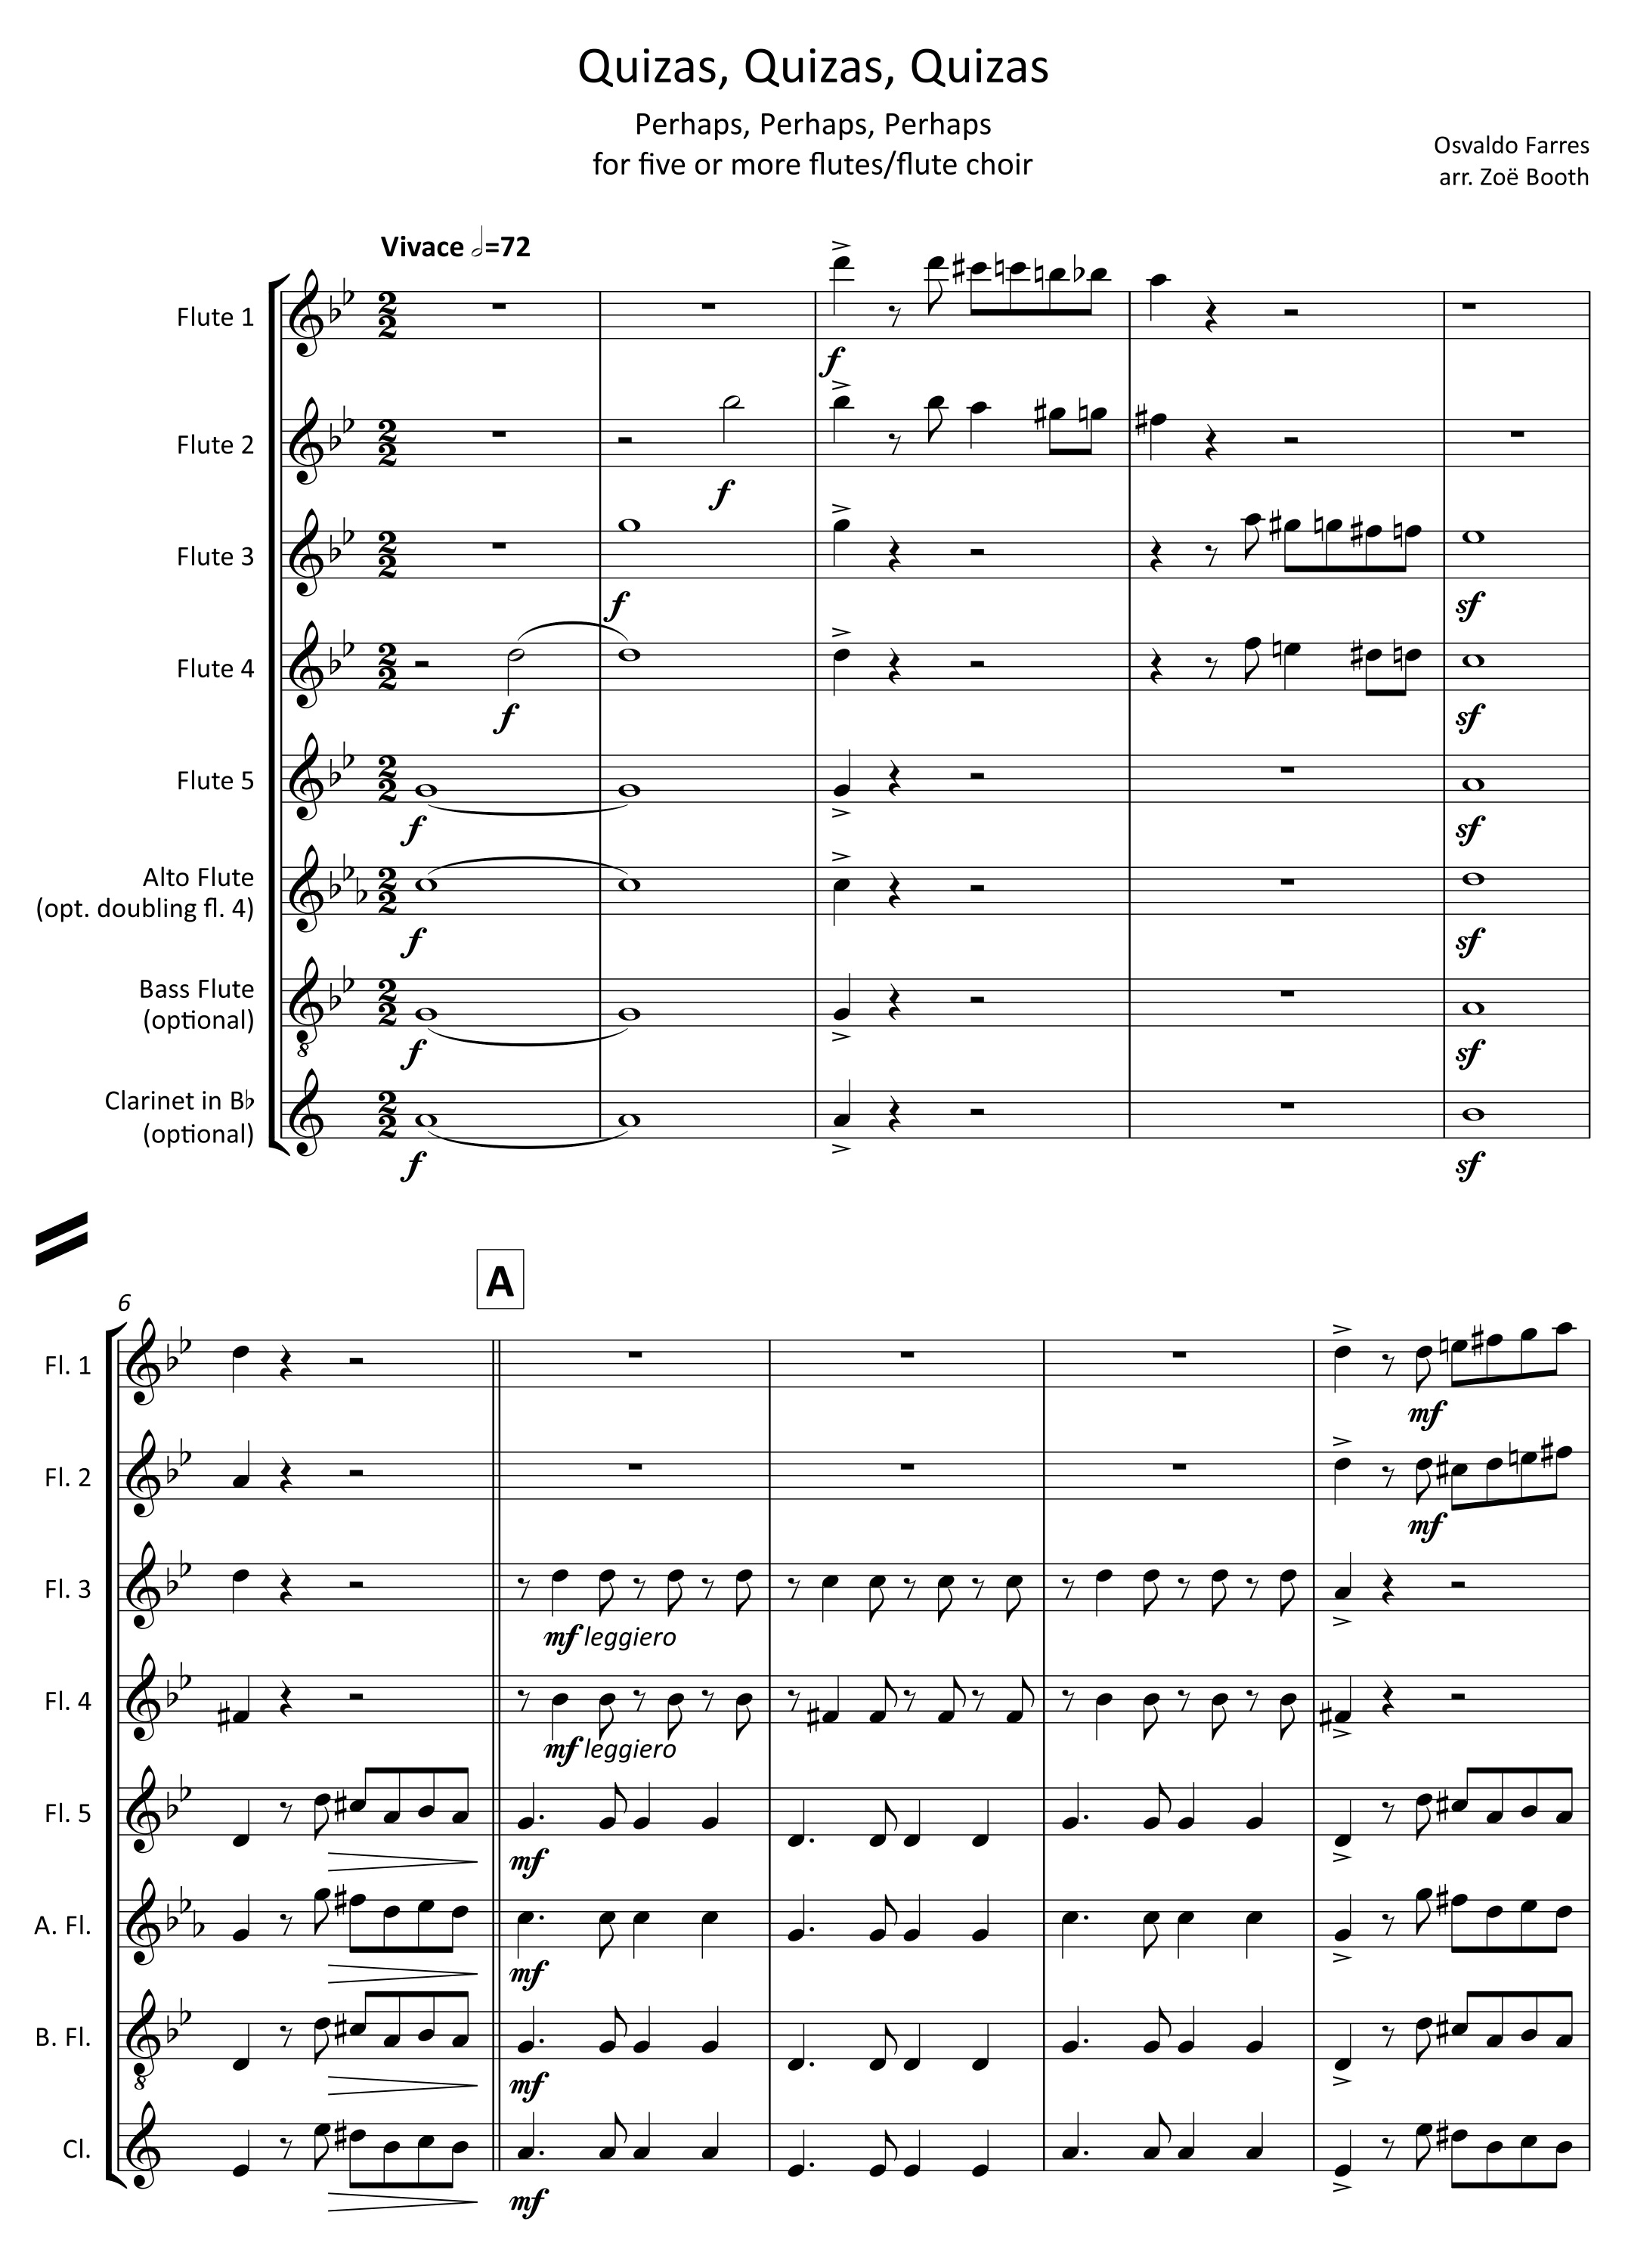 Quizas, Quizas, Quizas by Farres, arranged by Zoë Booth for five or more flutes/flute choir